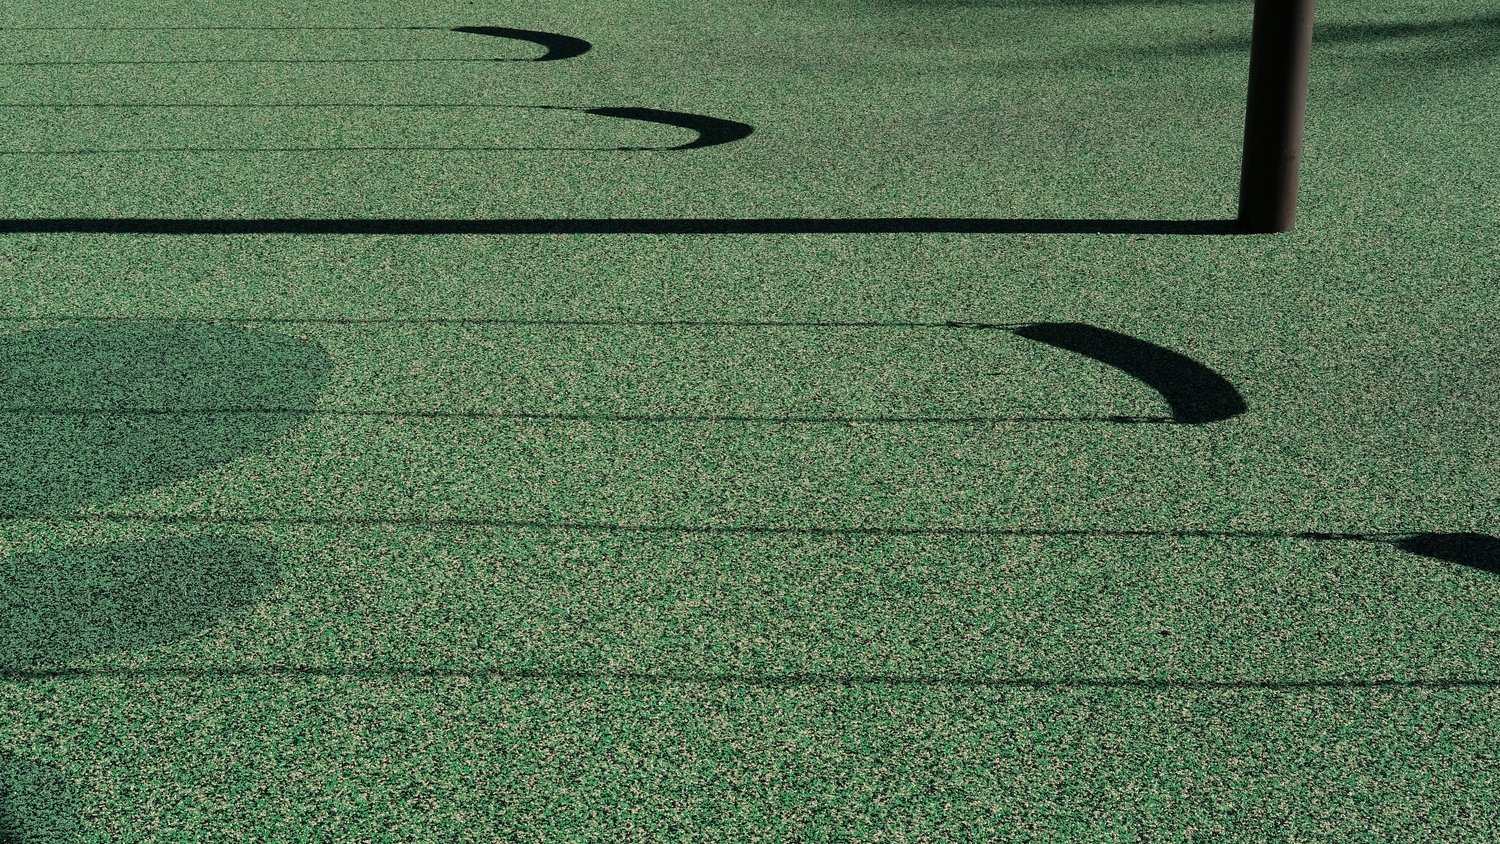 Shadows of swings against the playground surface.